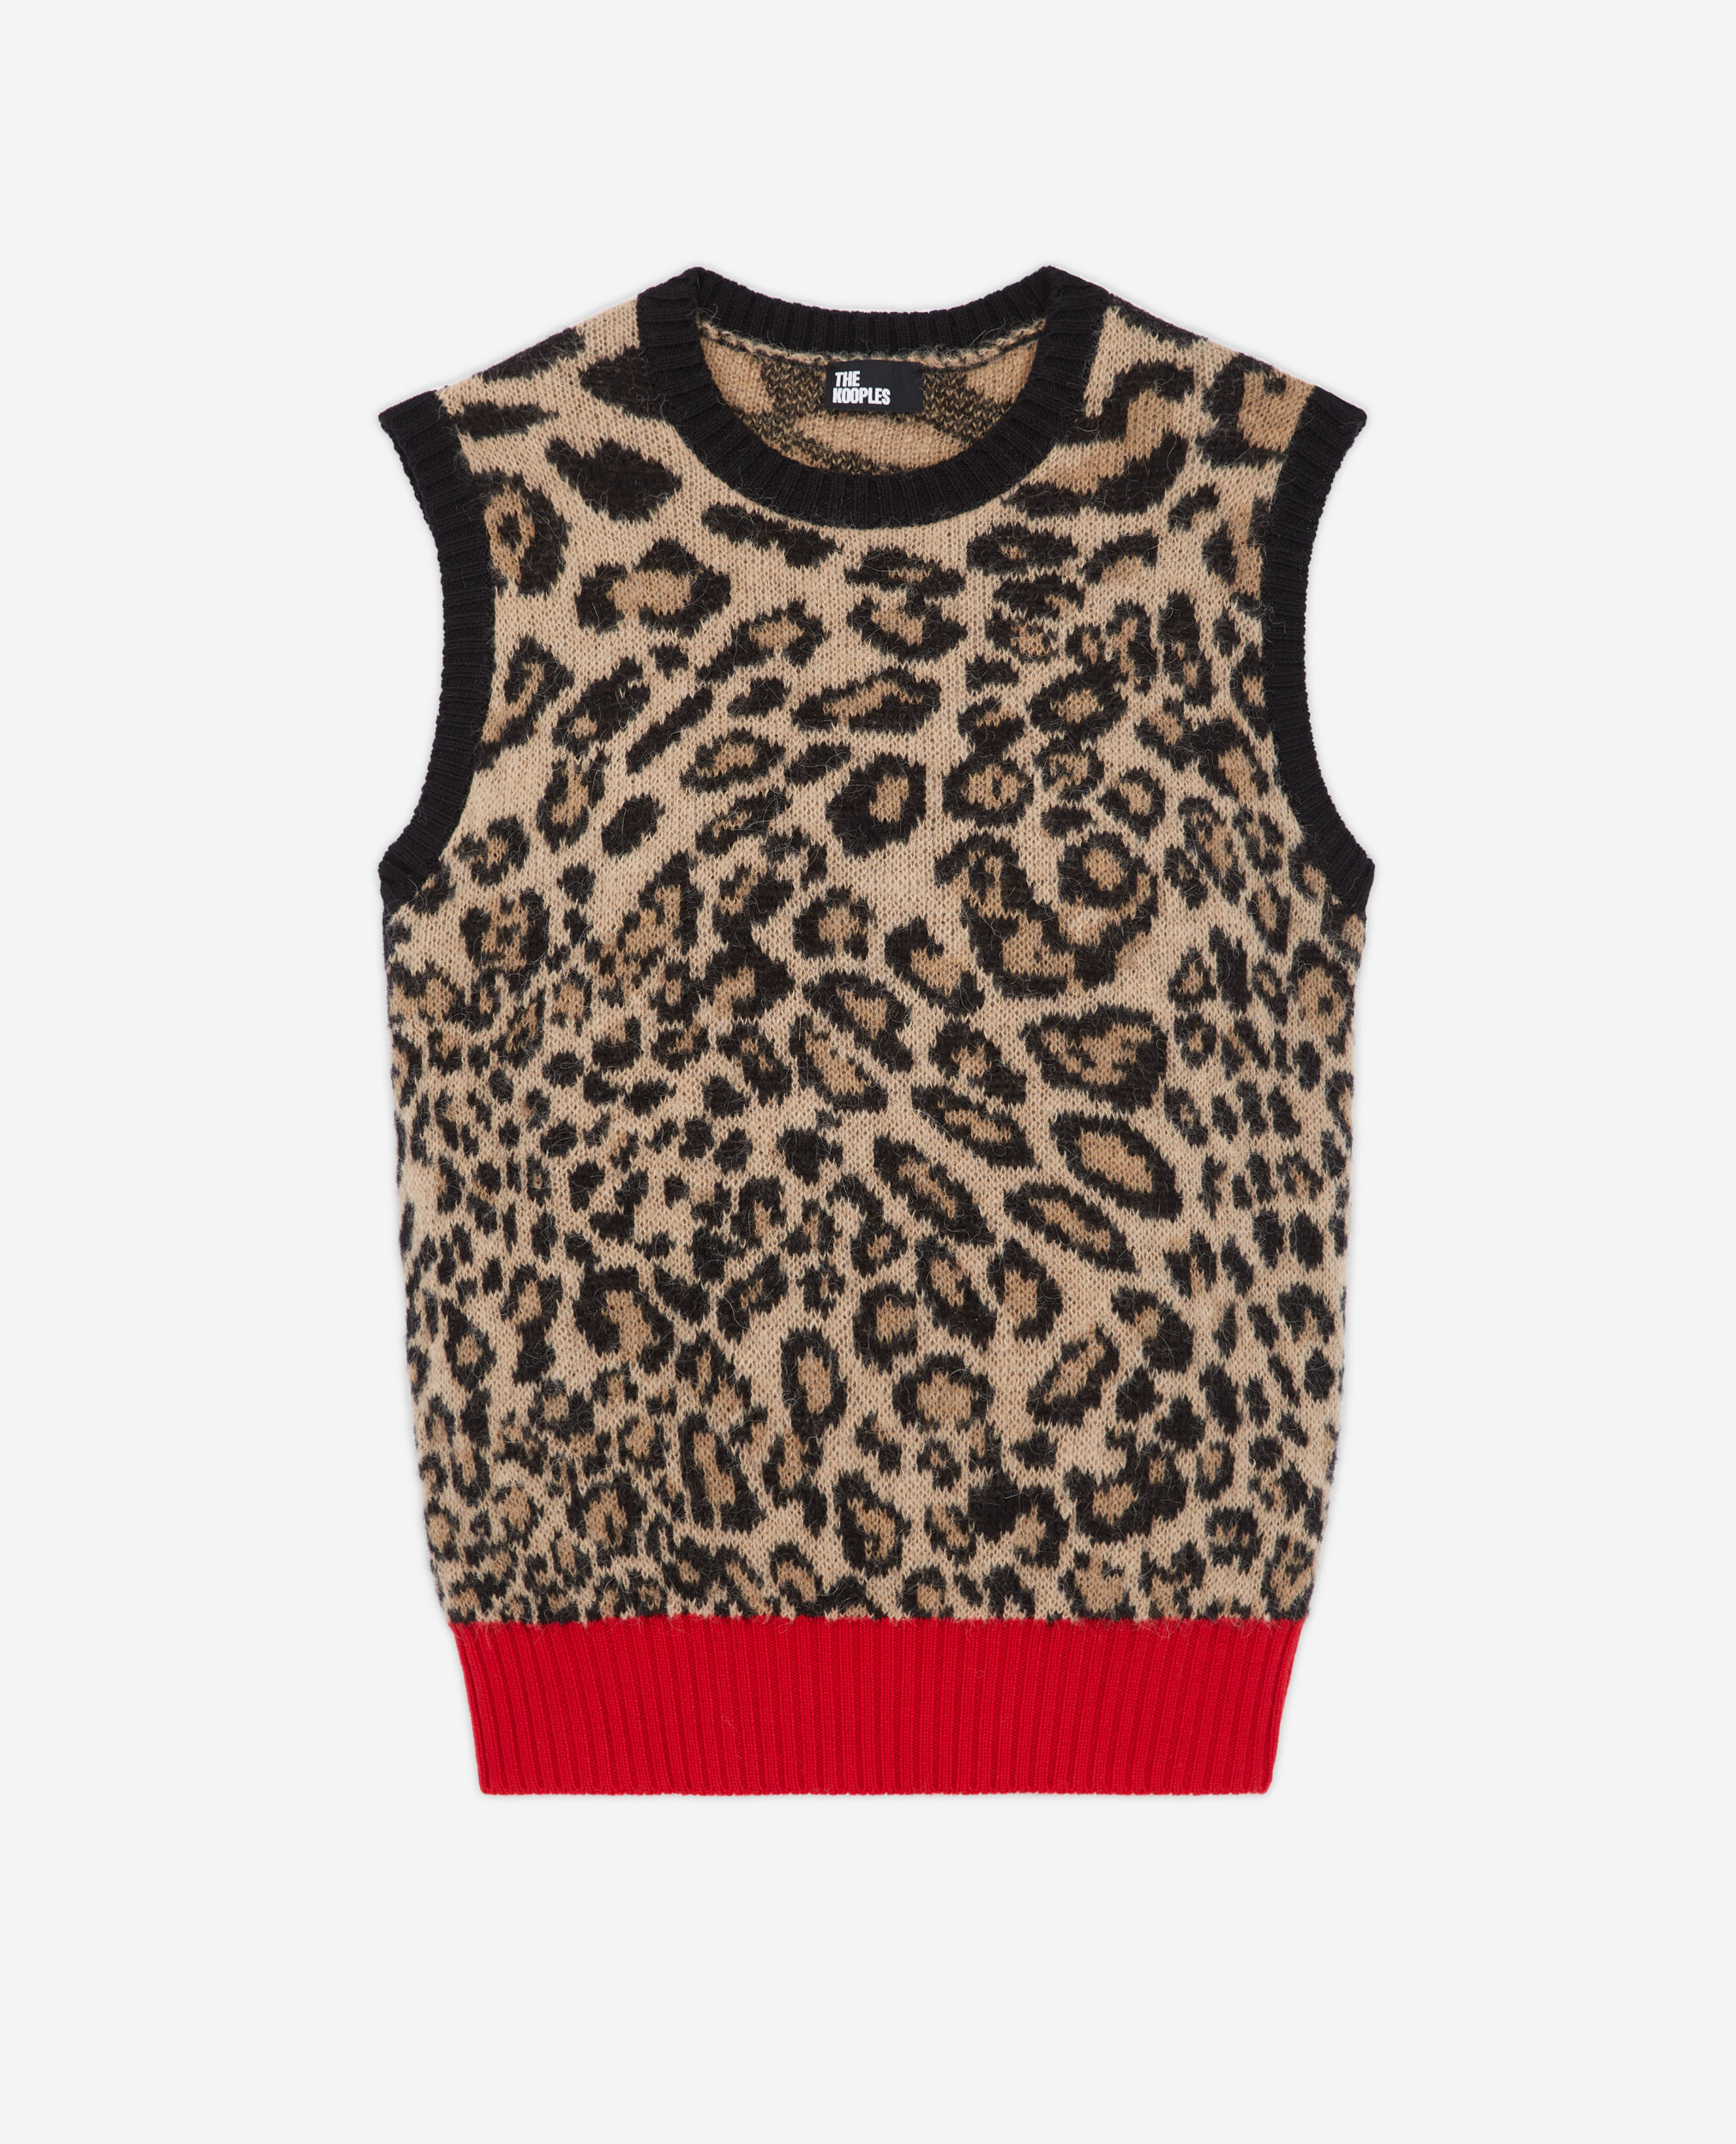 Sleeveless leopard print sweater, LEOPARD, hi-res image number null